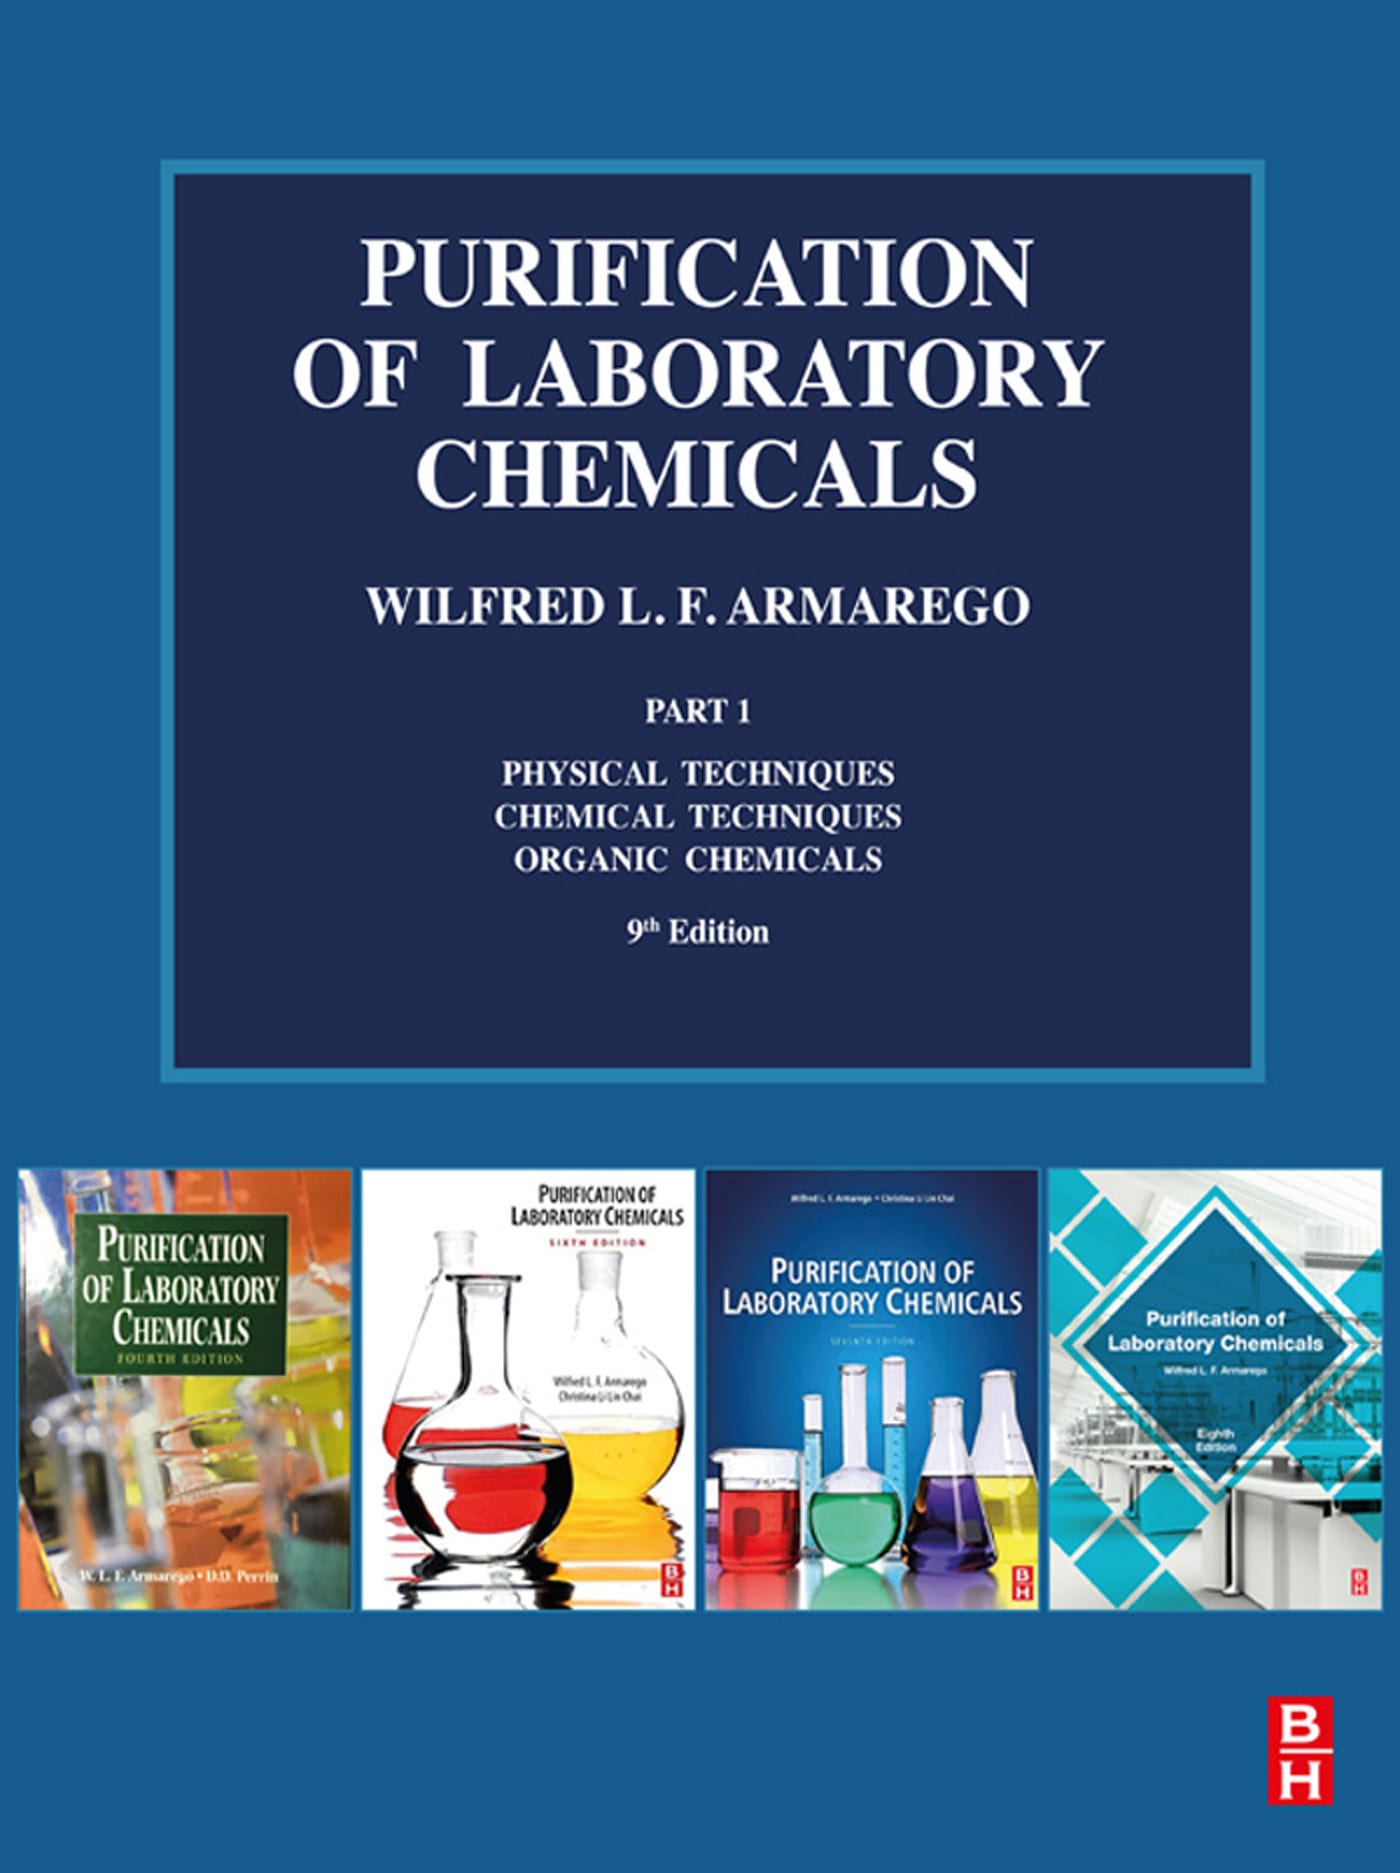 purification of laboratory chemicals part 1 9th edition w l f armarego 0323984436, 9780323984430